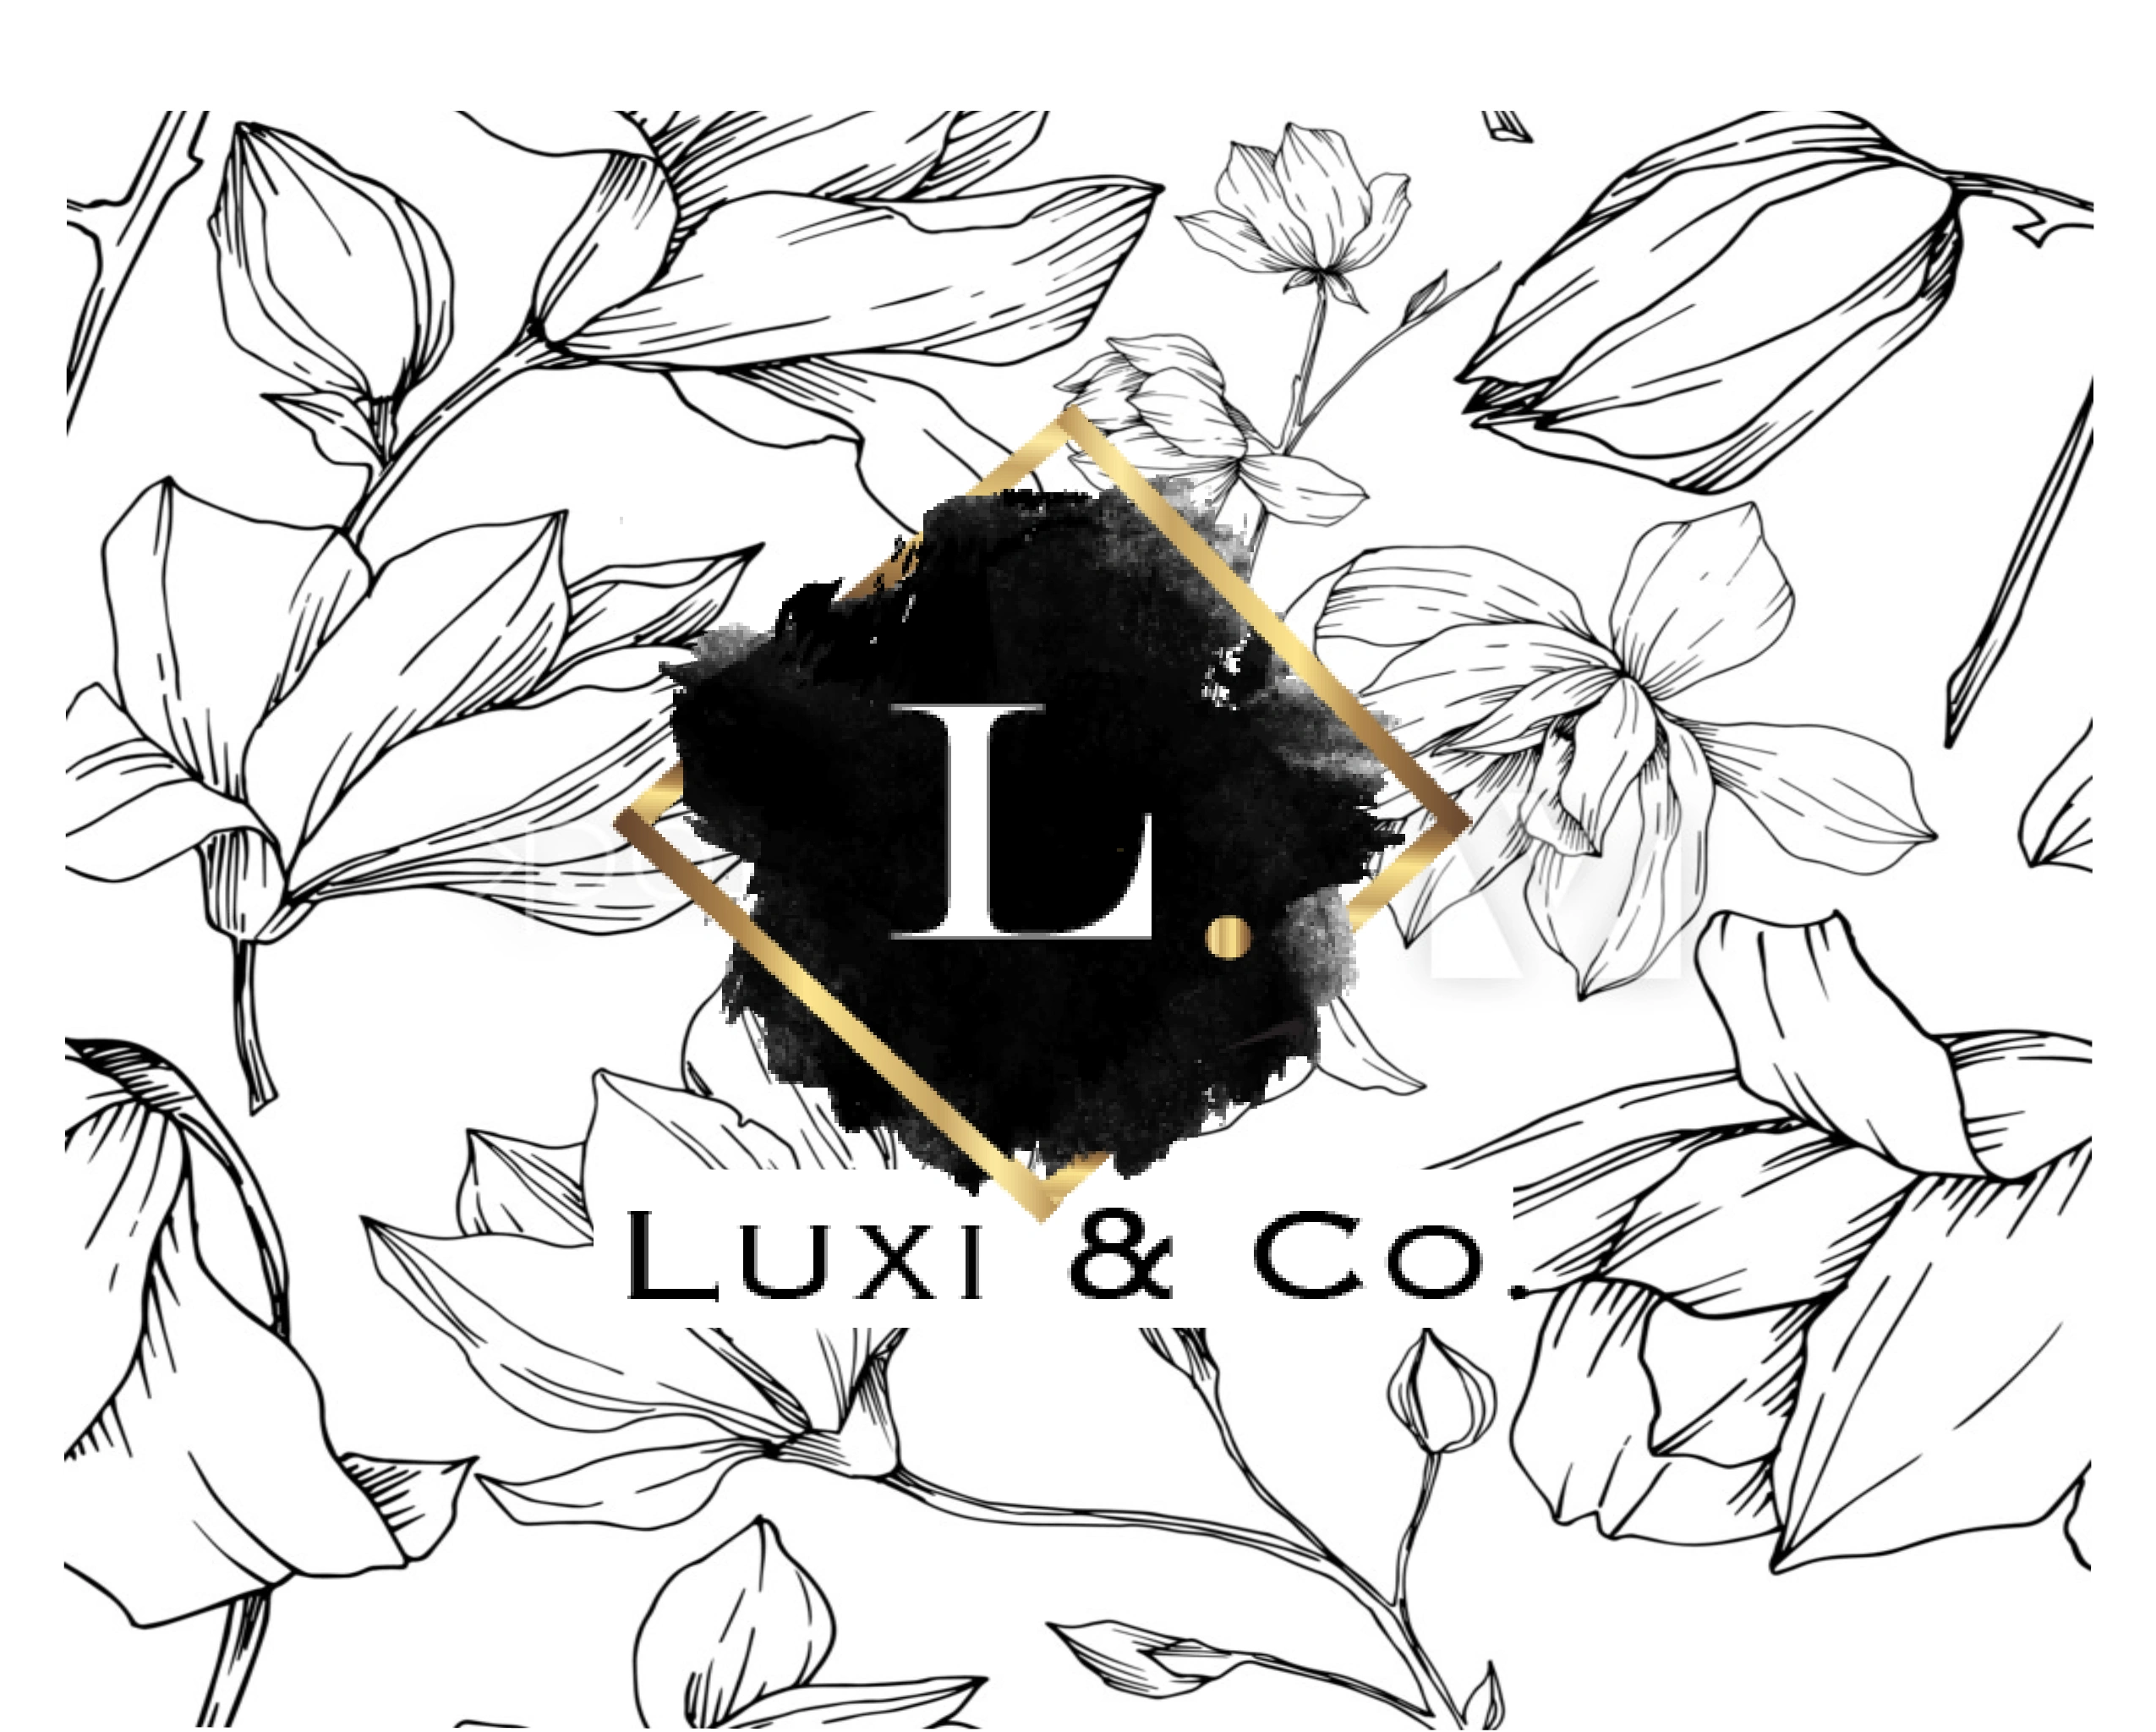 Luxi & Co. Healthy, Health Standards